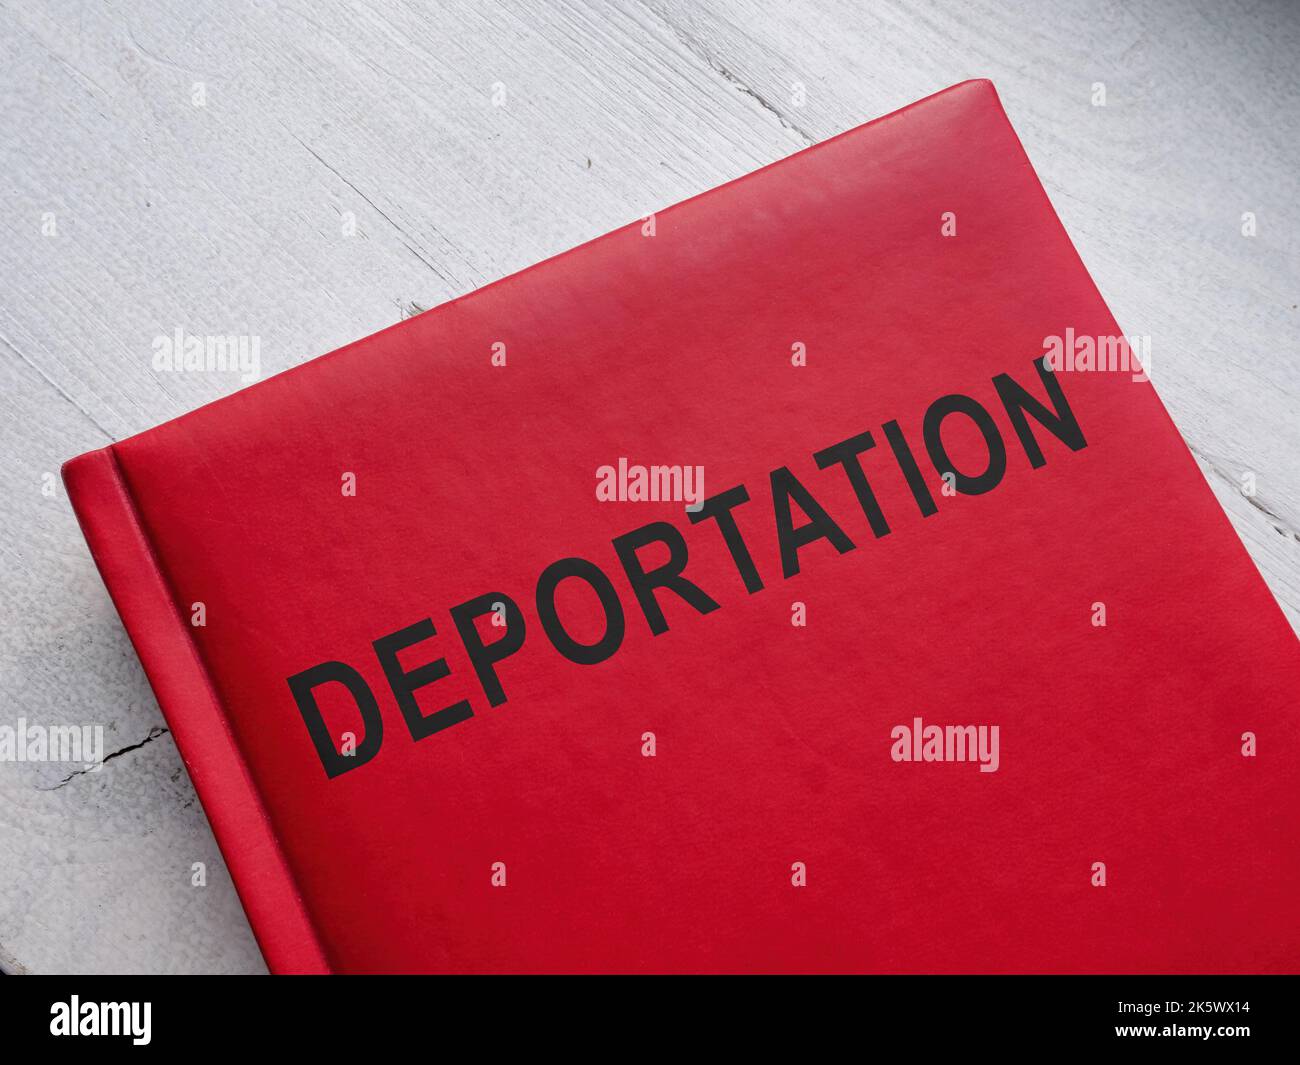 Rules about deportation and immigration law on the wooden surface. Stock Photo